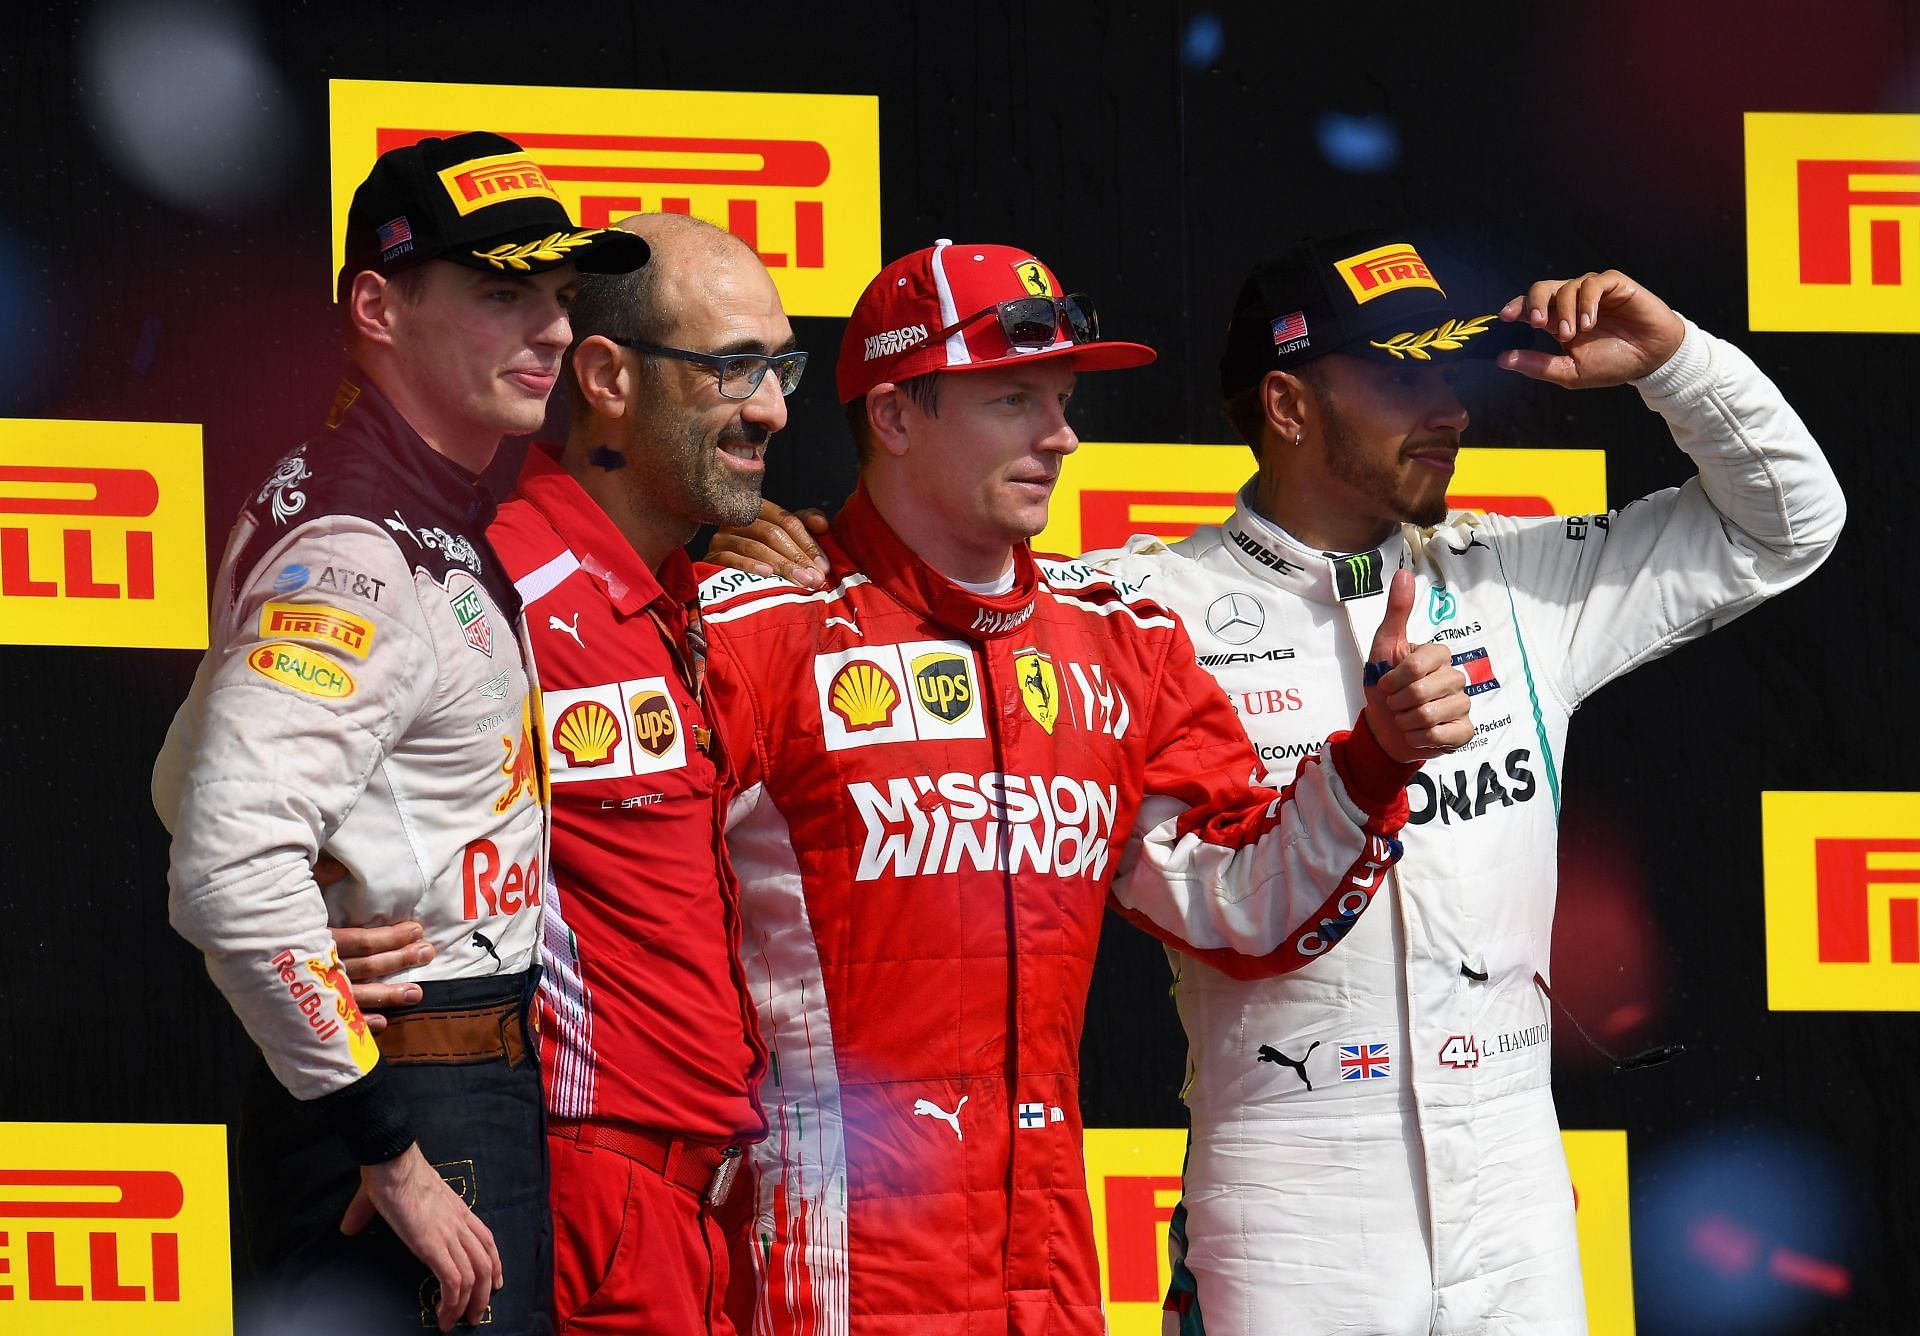 F1 Grand Prix of USA - Lewis Hamilton (right) has seen title defeat in the hands of both podium winners here: Max Verstappen (left) and Kimi Raikkonen (center)